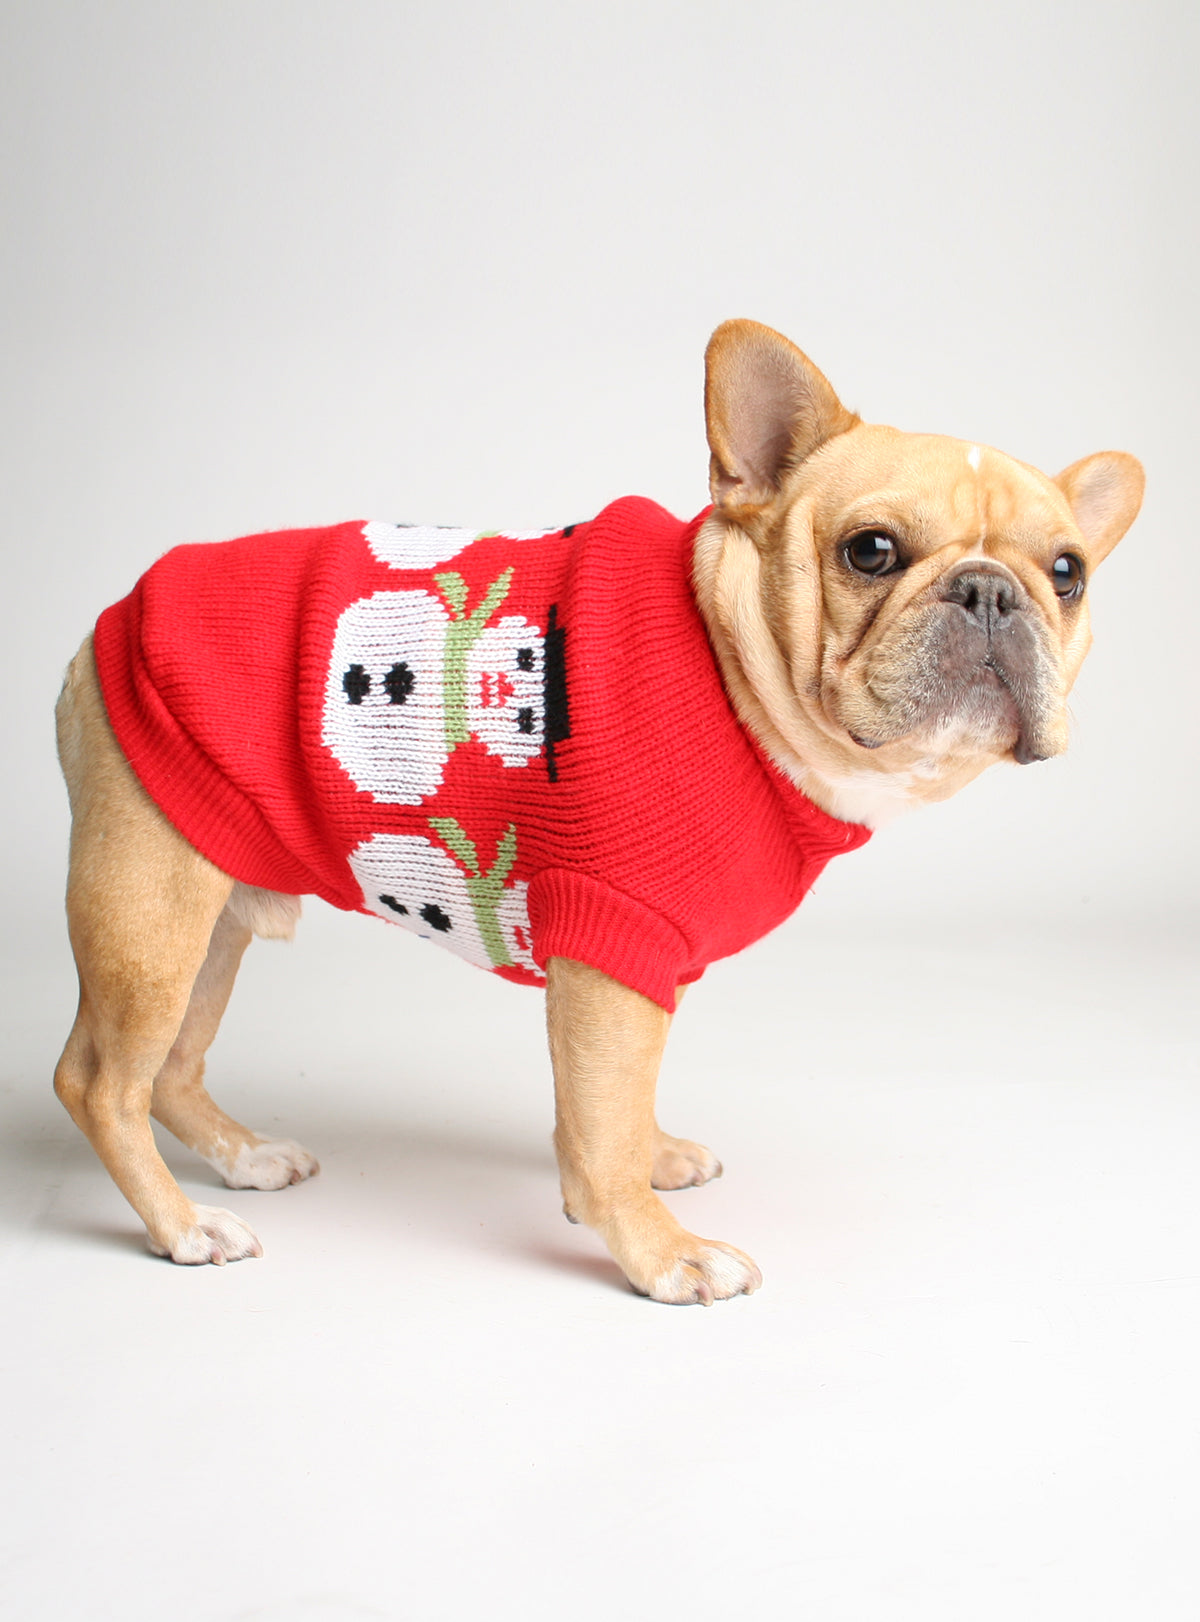 The Frosty Dog Sweater